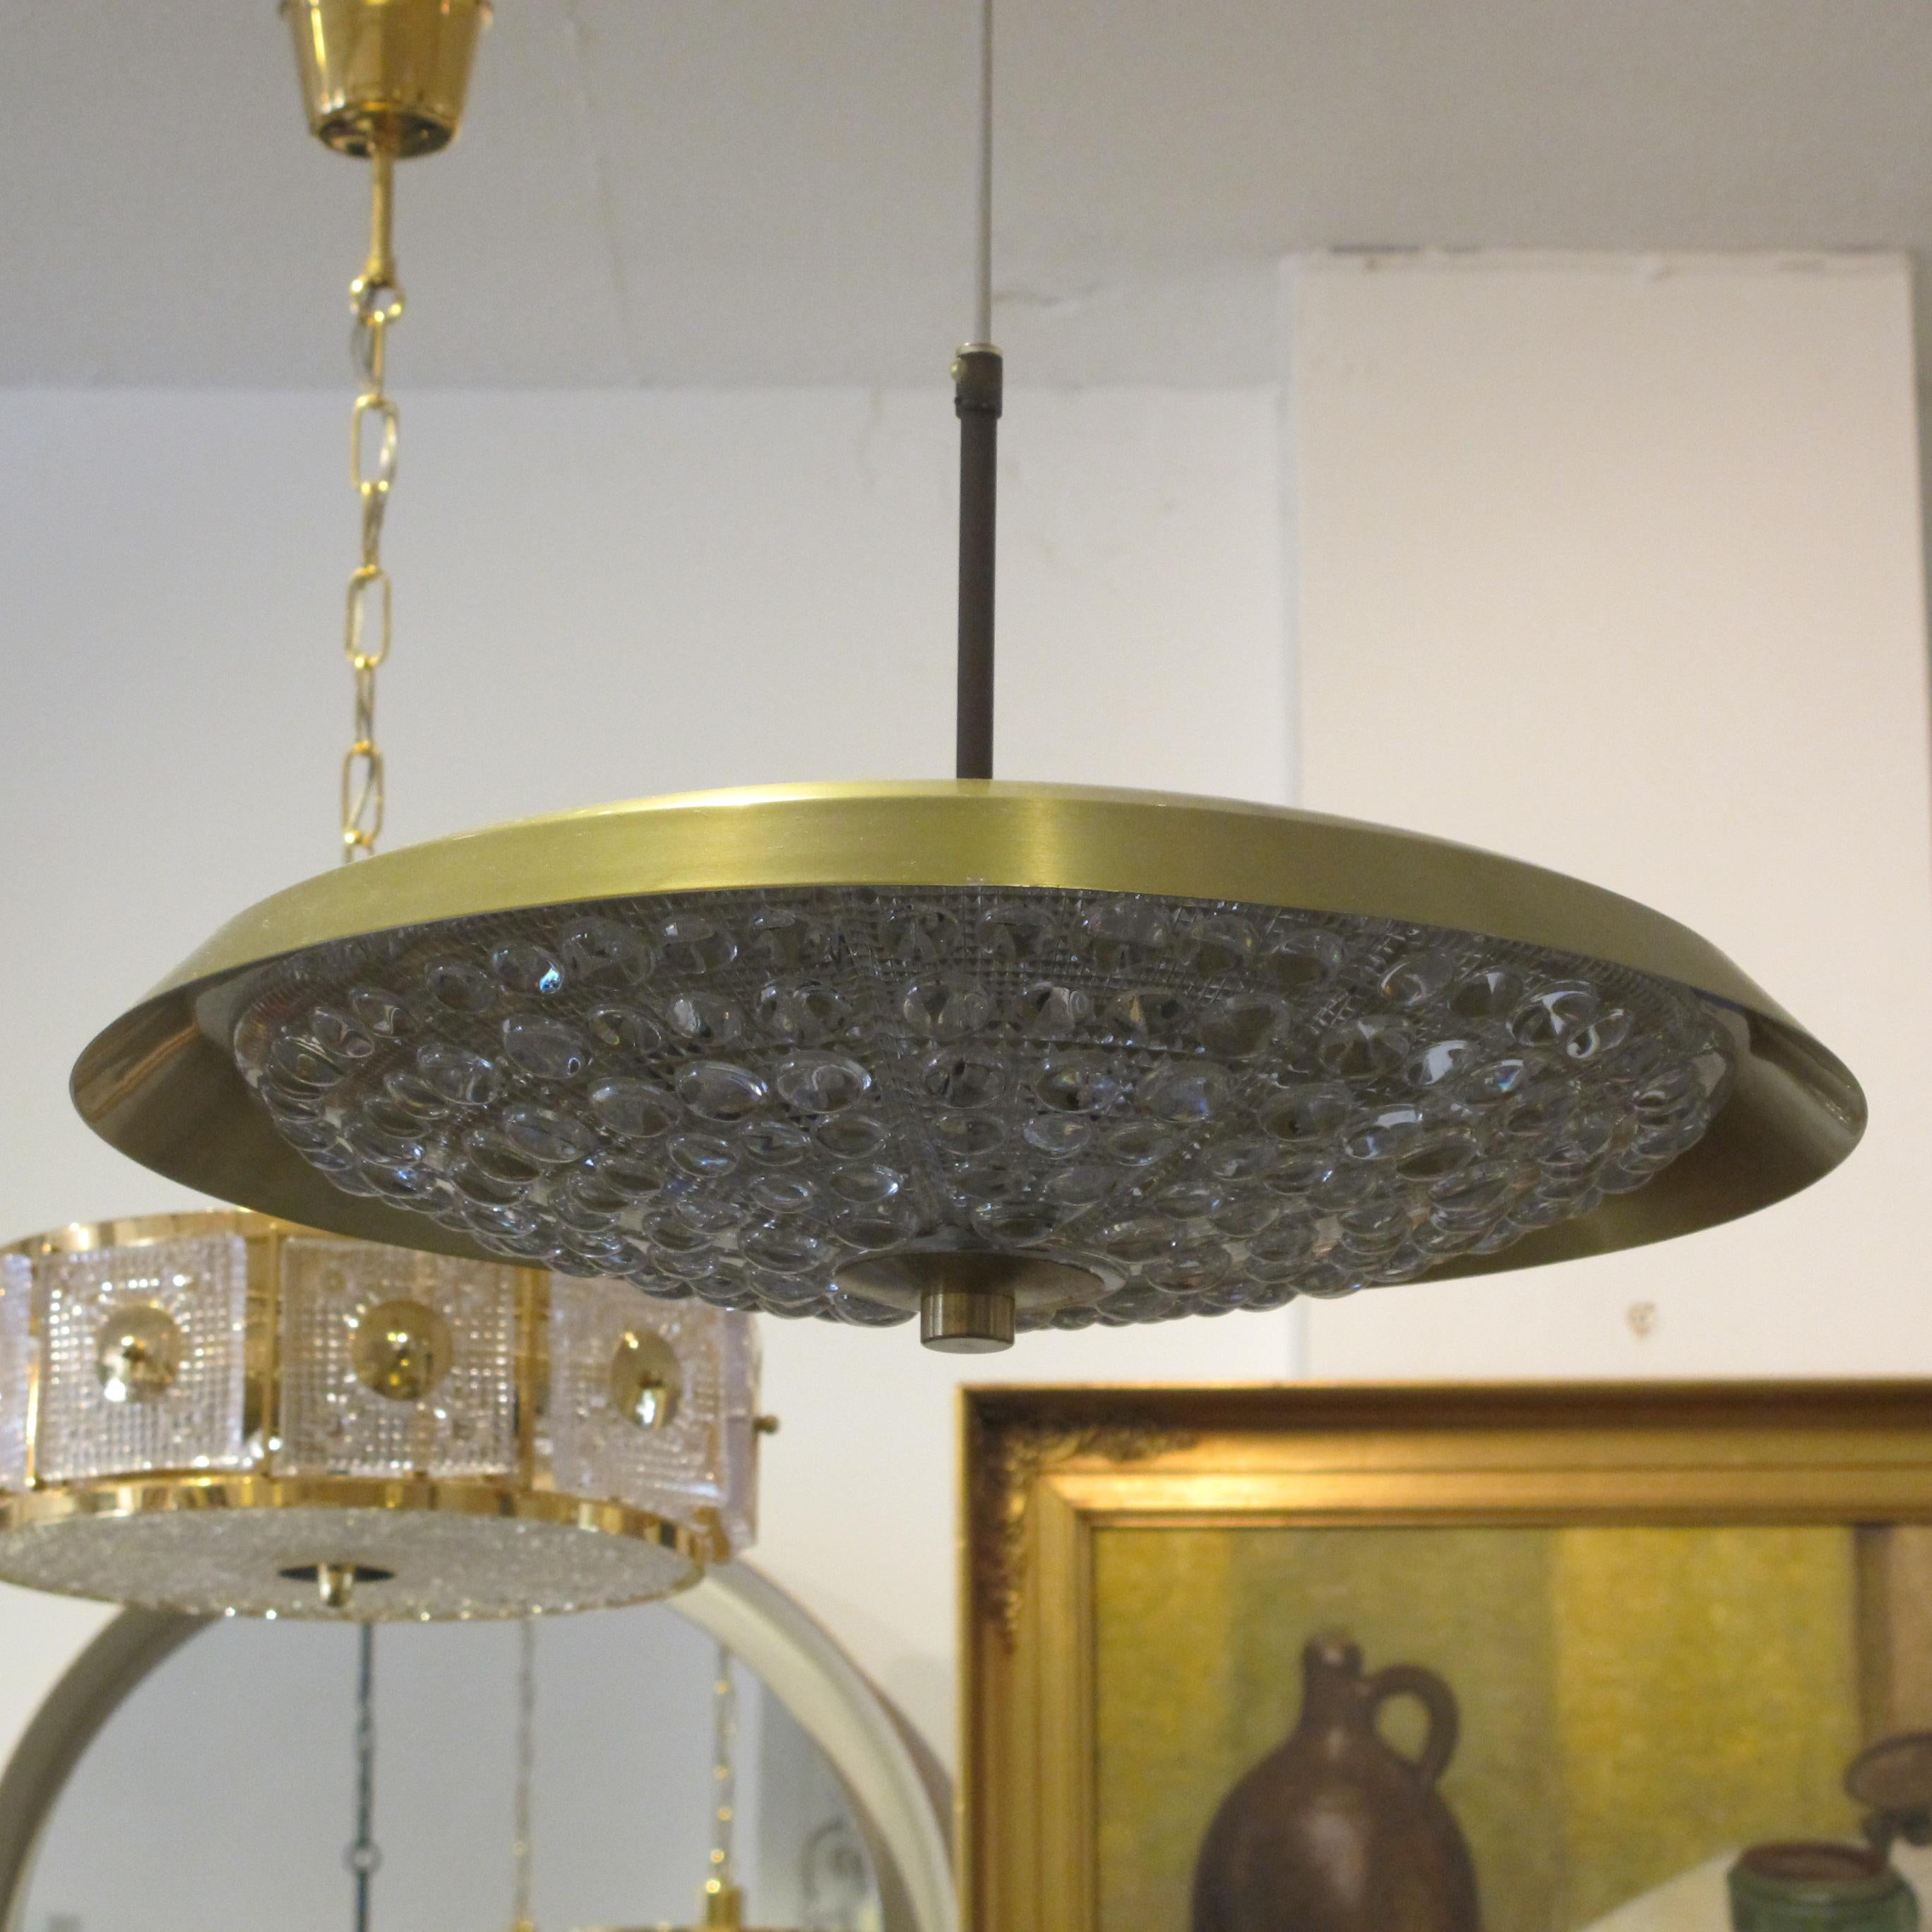 1960s Swedish Brass and Glass Ceiling Pendant Light with Moulded Glass 1